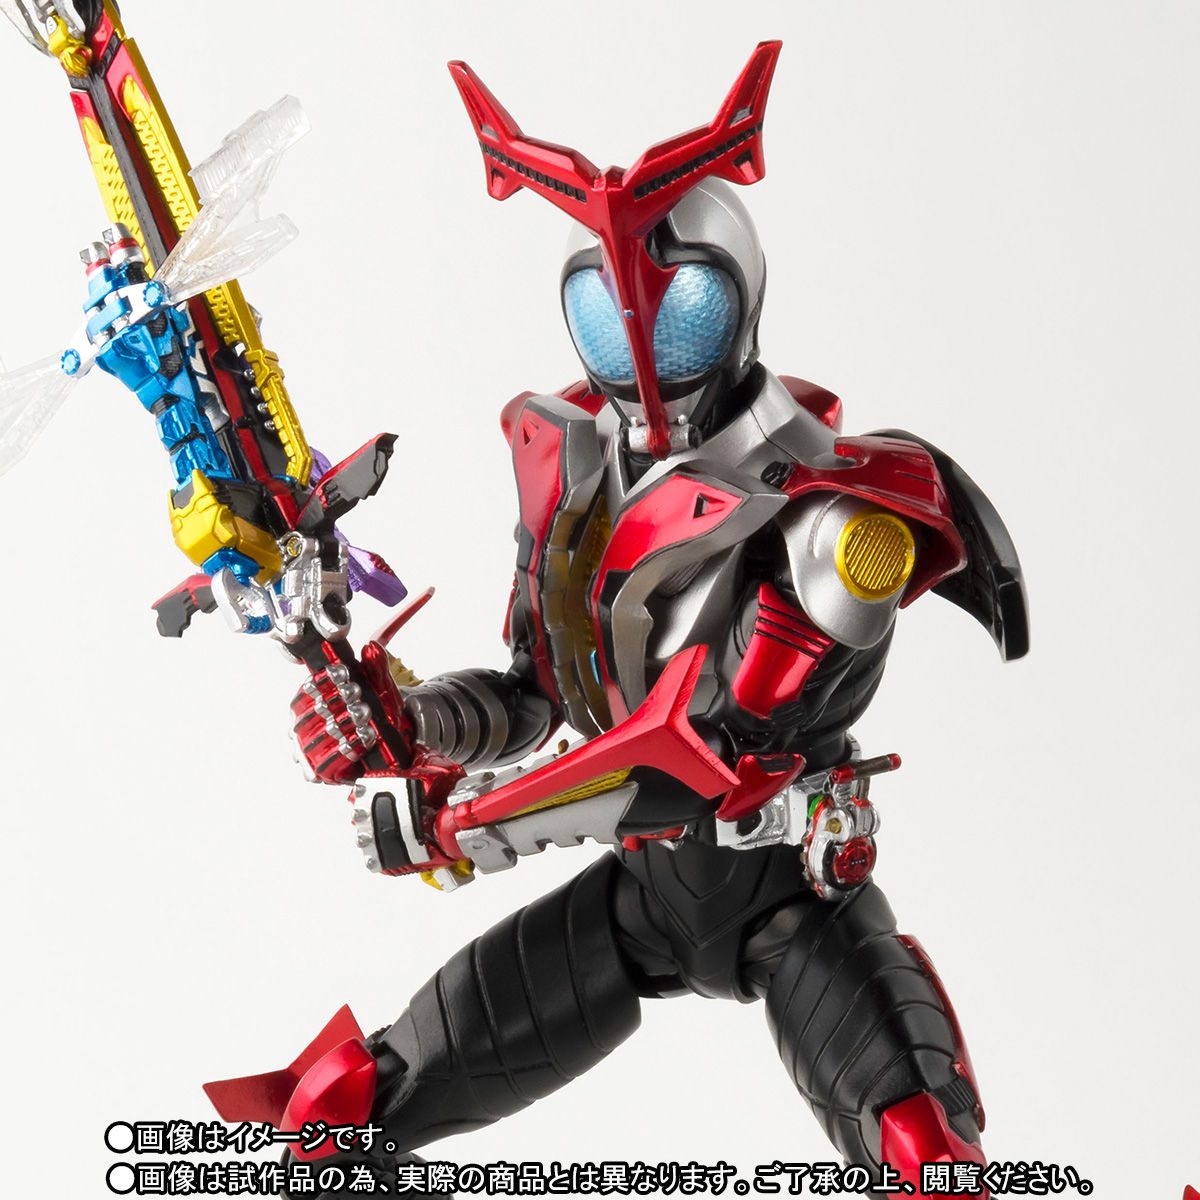 S.H.Figuarts 真骨彫製法 仮面ライダーカブト ハイパーフォーム